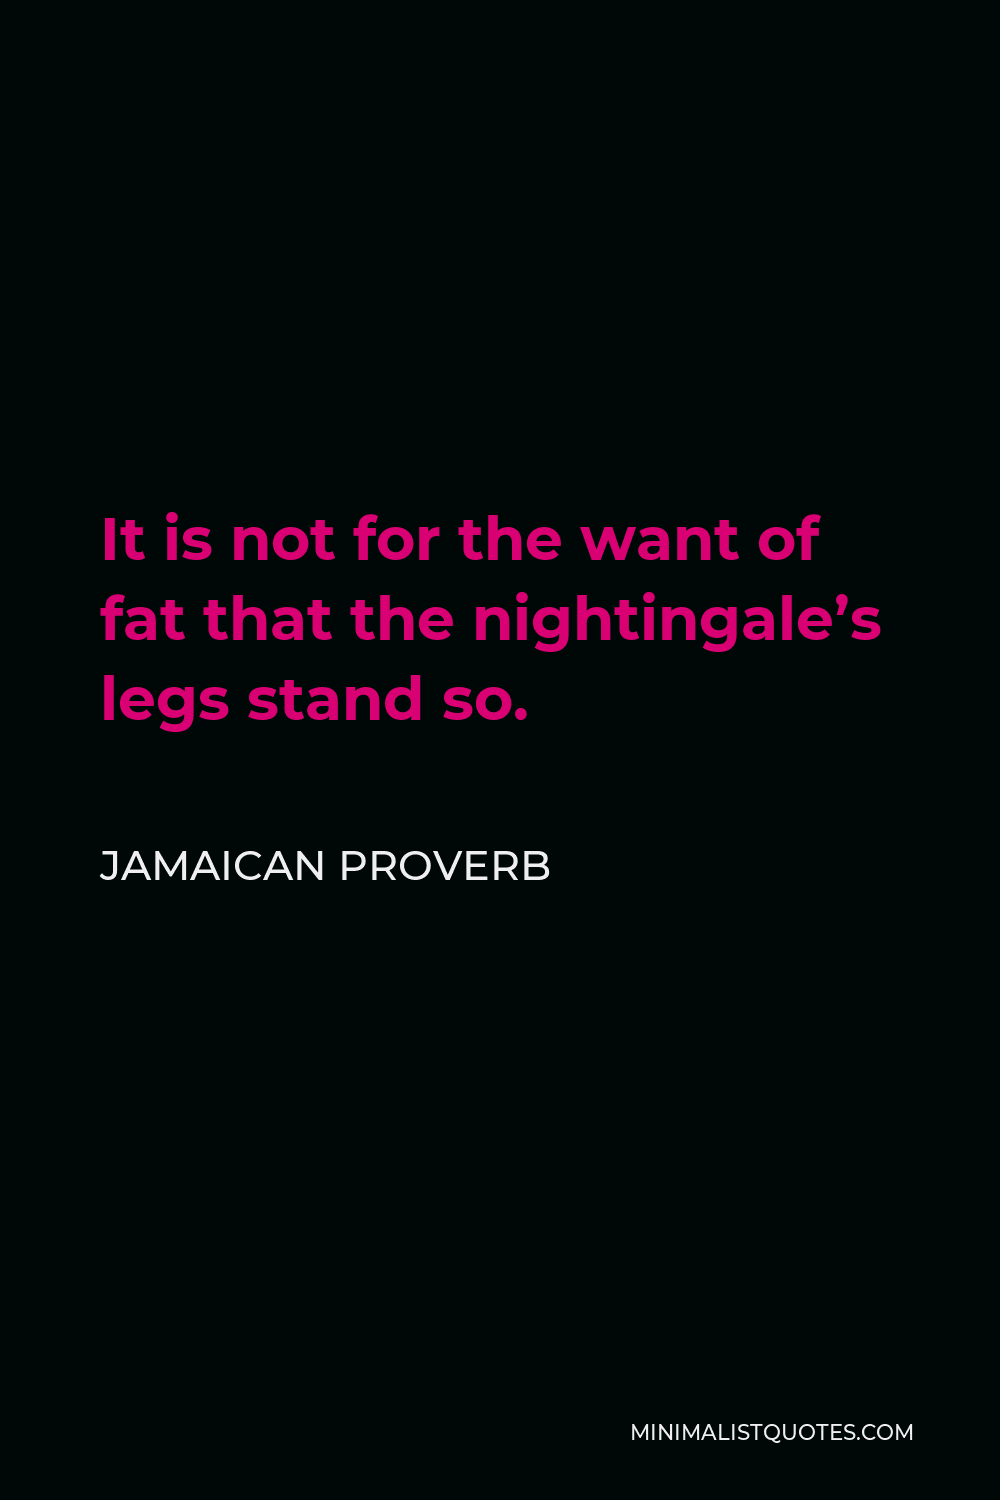 Jamaican Proverb Quote - It is not for the want of fat that the nightingale’s legs stand so.